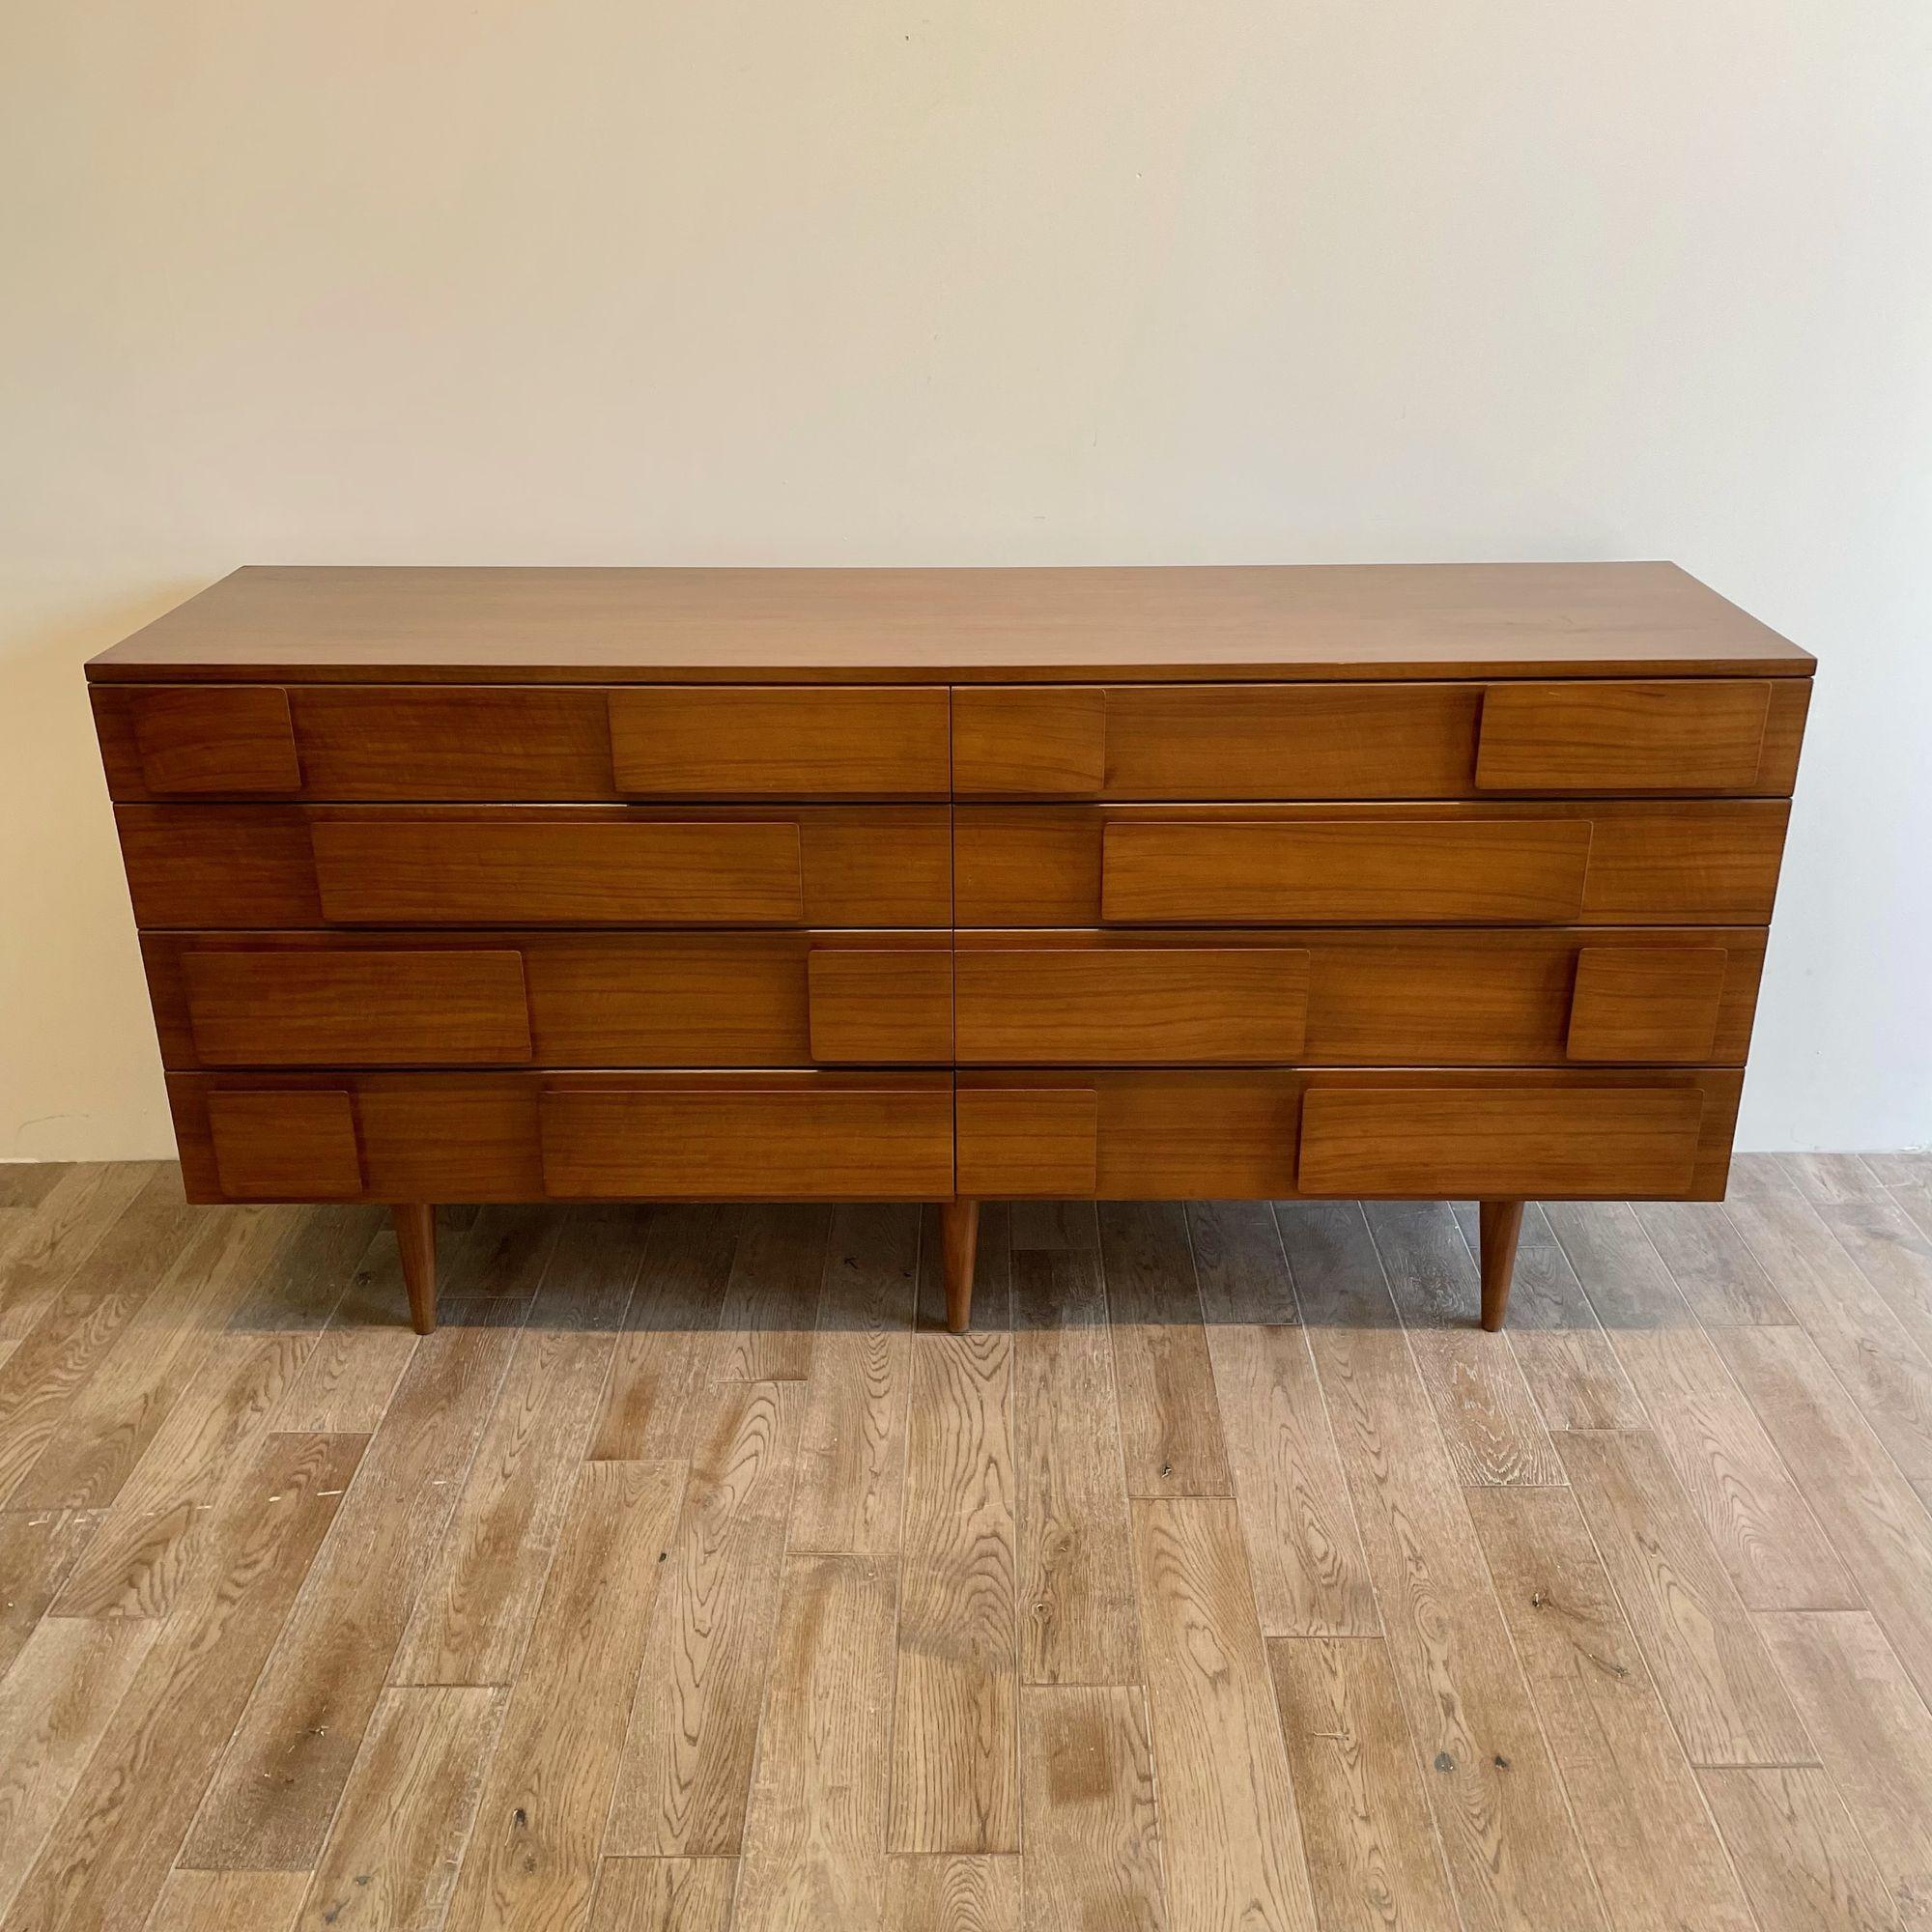 Wood Gio Ponti, Singer and Sons, Italian Mid-Century Modern, Dresser, Chest, 1950s For Sale